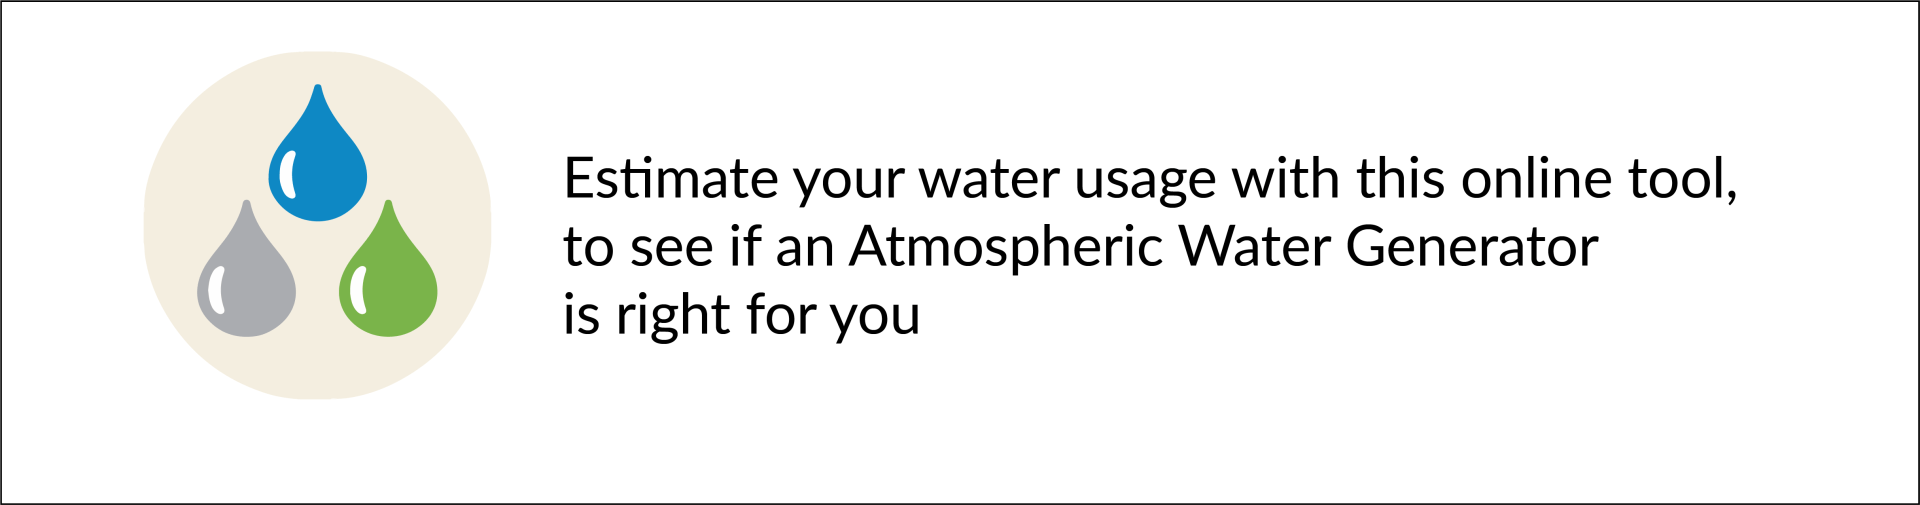 Calculate your water usage